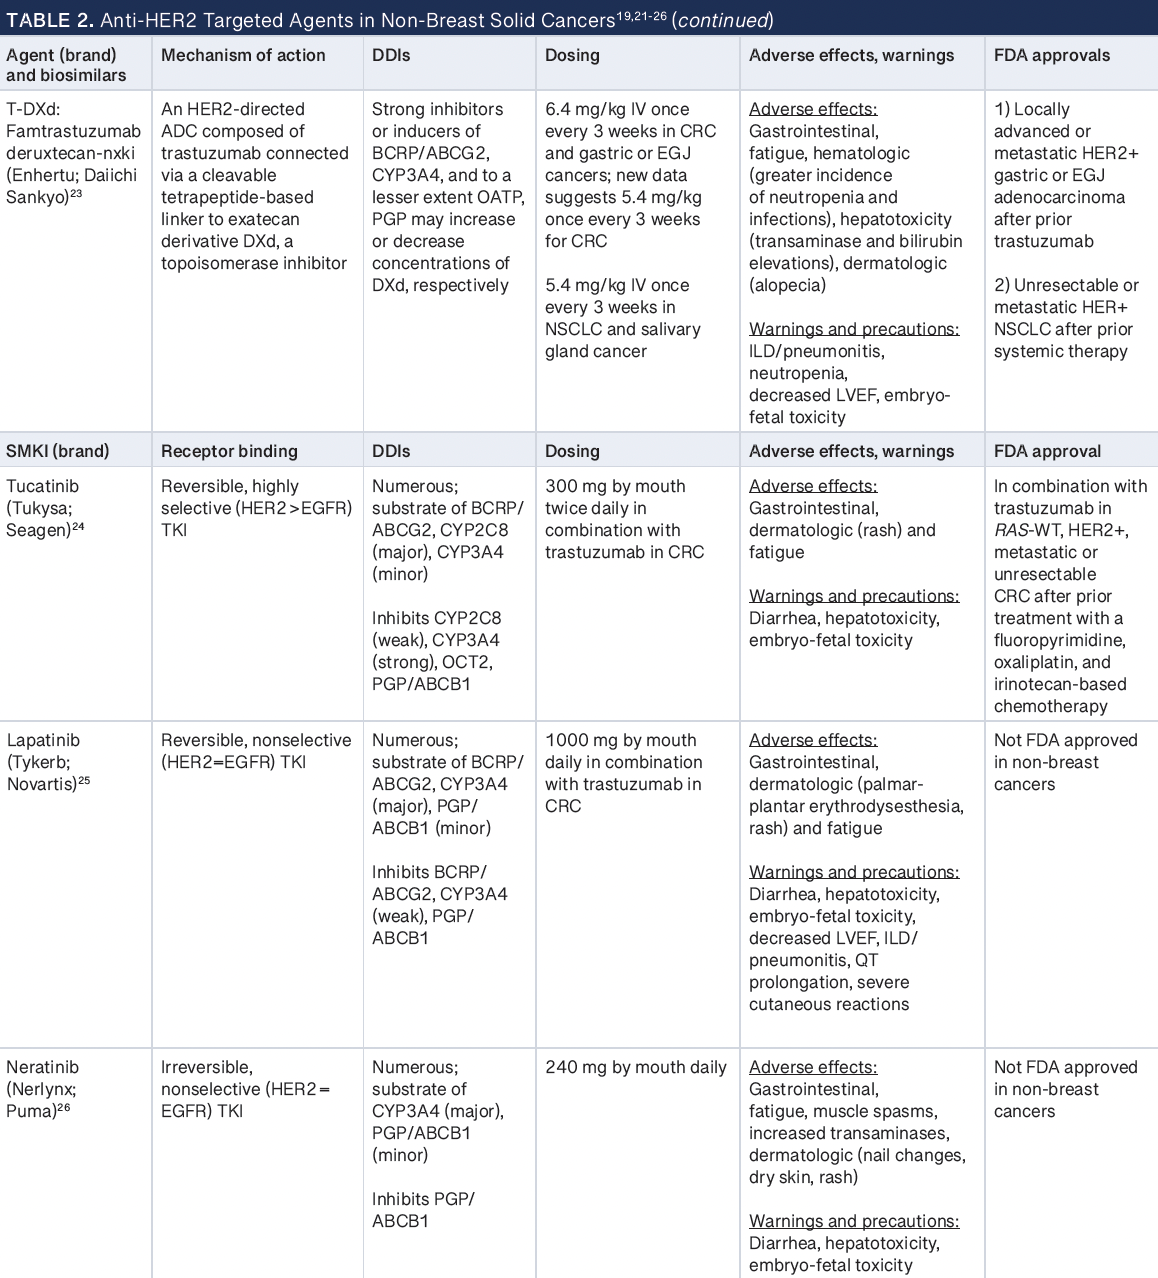 Table 2 (cont.) -- ADC, antibody-drug conjugate; CRC, colorectal cancer; DDI, drug-drug interaction; EGJ, esophagogastric junction; ILD, interstitial lung disease; LVEF, left ventricular ejection fraction; NSCLC, non–small cell lung cancer; PGP, P-glycoprotein; SMKI, small-molecule kinase inhibitor; TKI, tyrosine kinase inhibitor; WT, wild type.